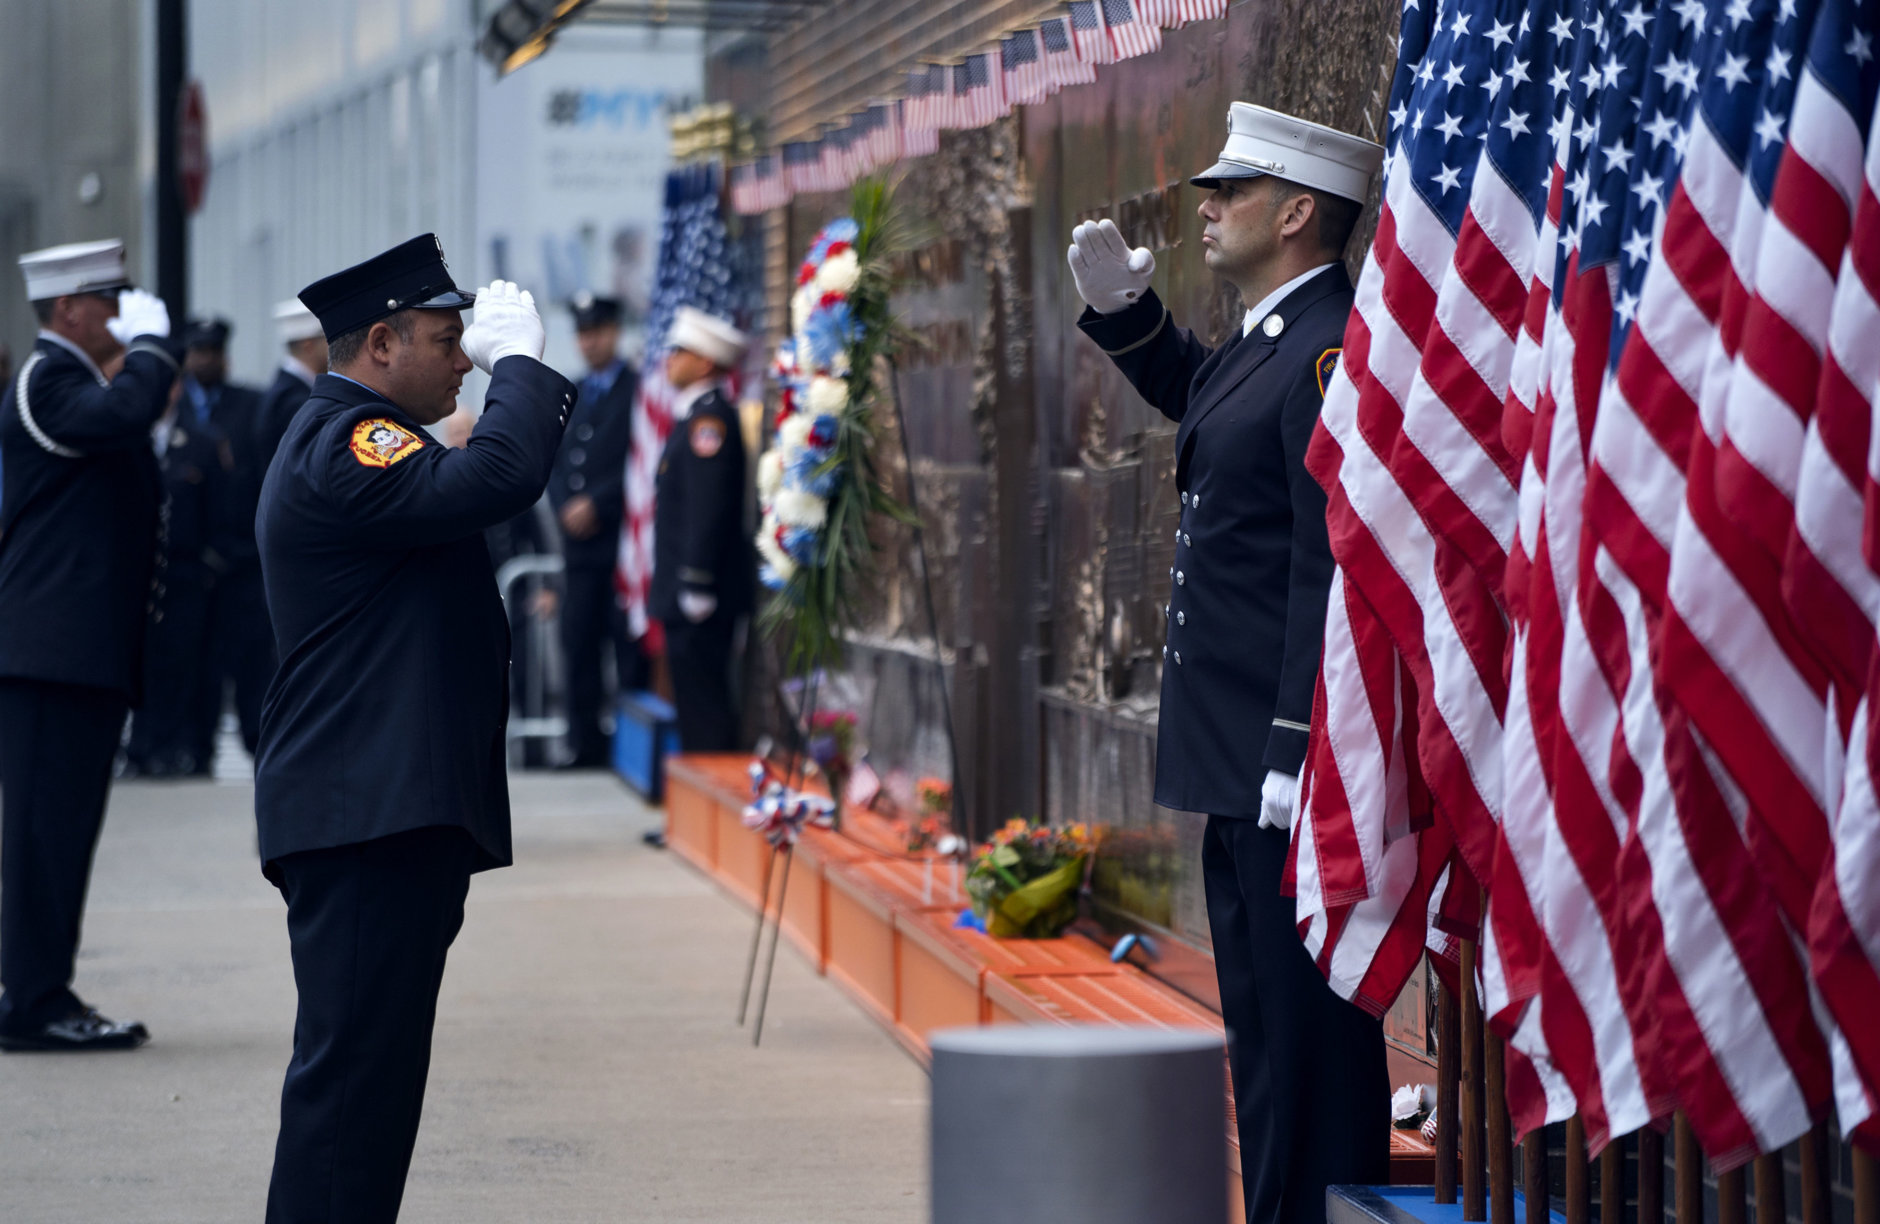 New York City firefighters salute in front of a memorial on the side of a firehouse adjacent to One World Trade Center and the 9/11 Memorial site during ceremonies on the anniversary of 9/11 terrorist attacks in New York on Tuesday, Sept. 11, 2018. (AP Photo/Craig Ruttle)